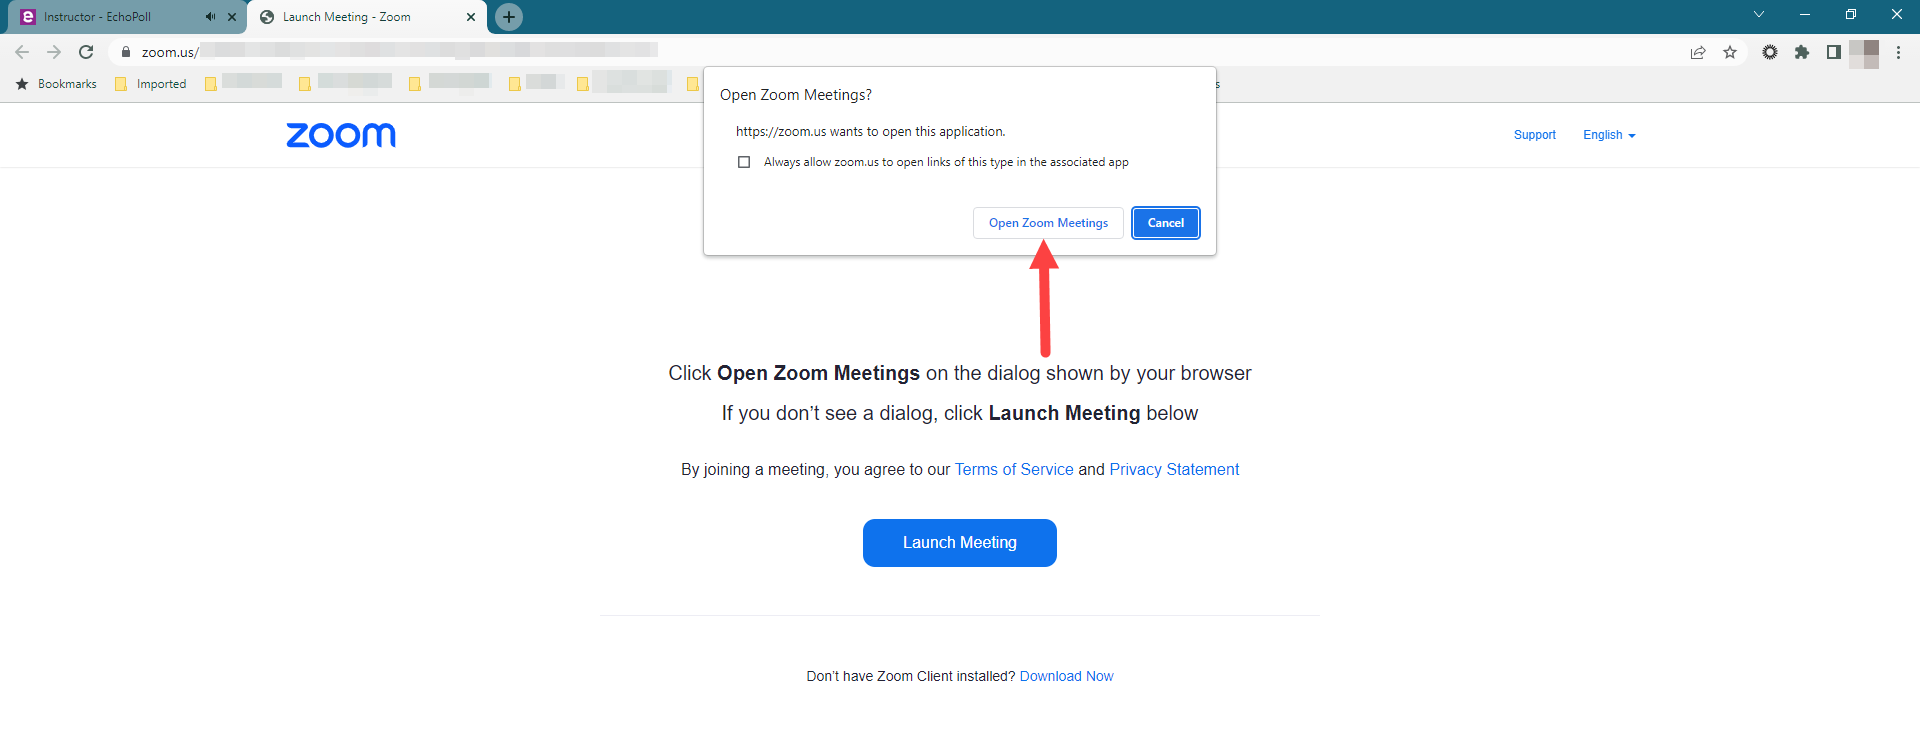 Open Zoom Meeting screen with Open Zoom Meetings button identified as described